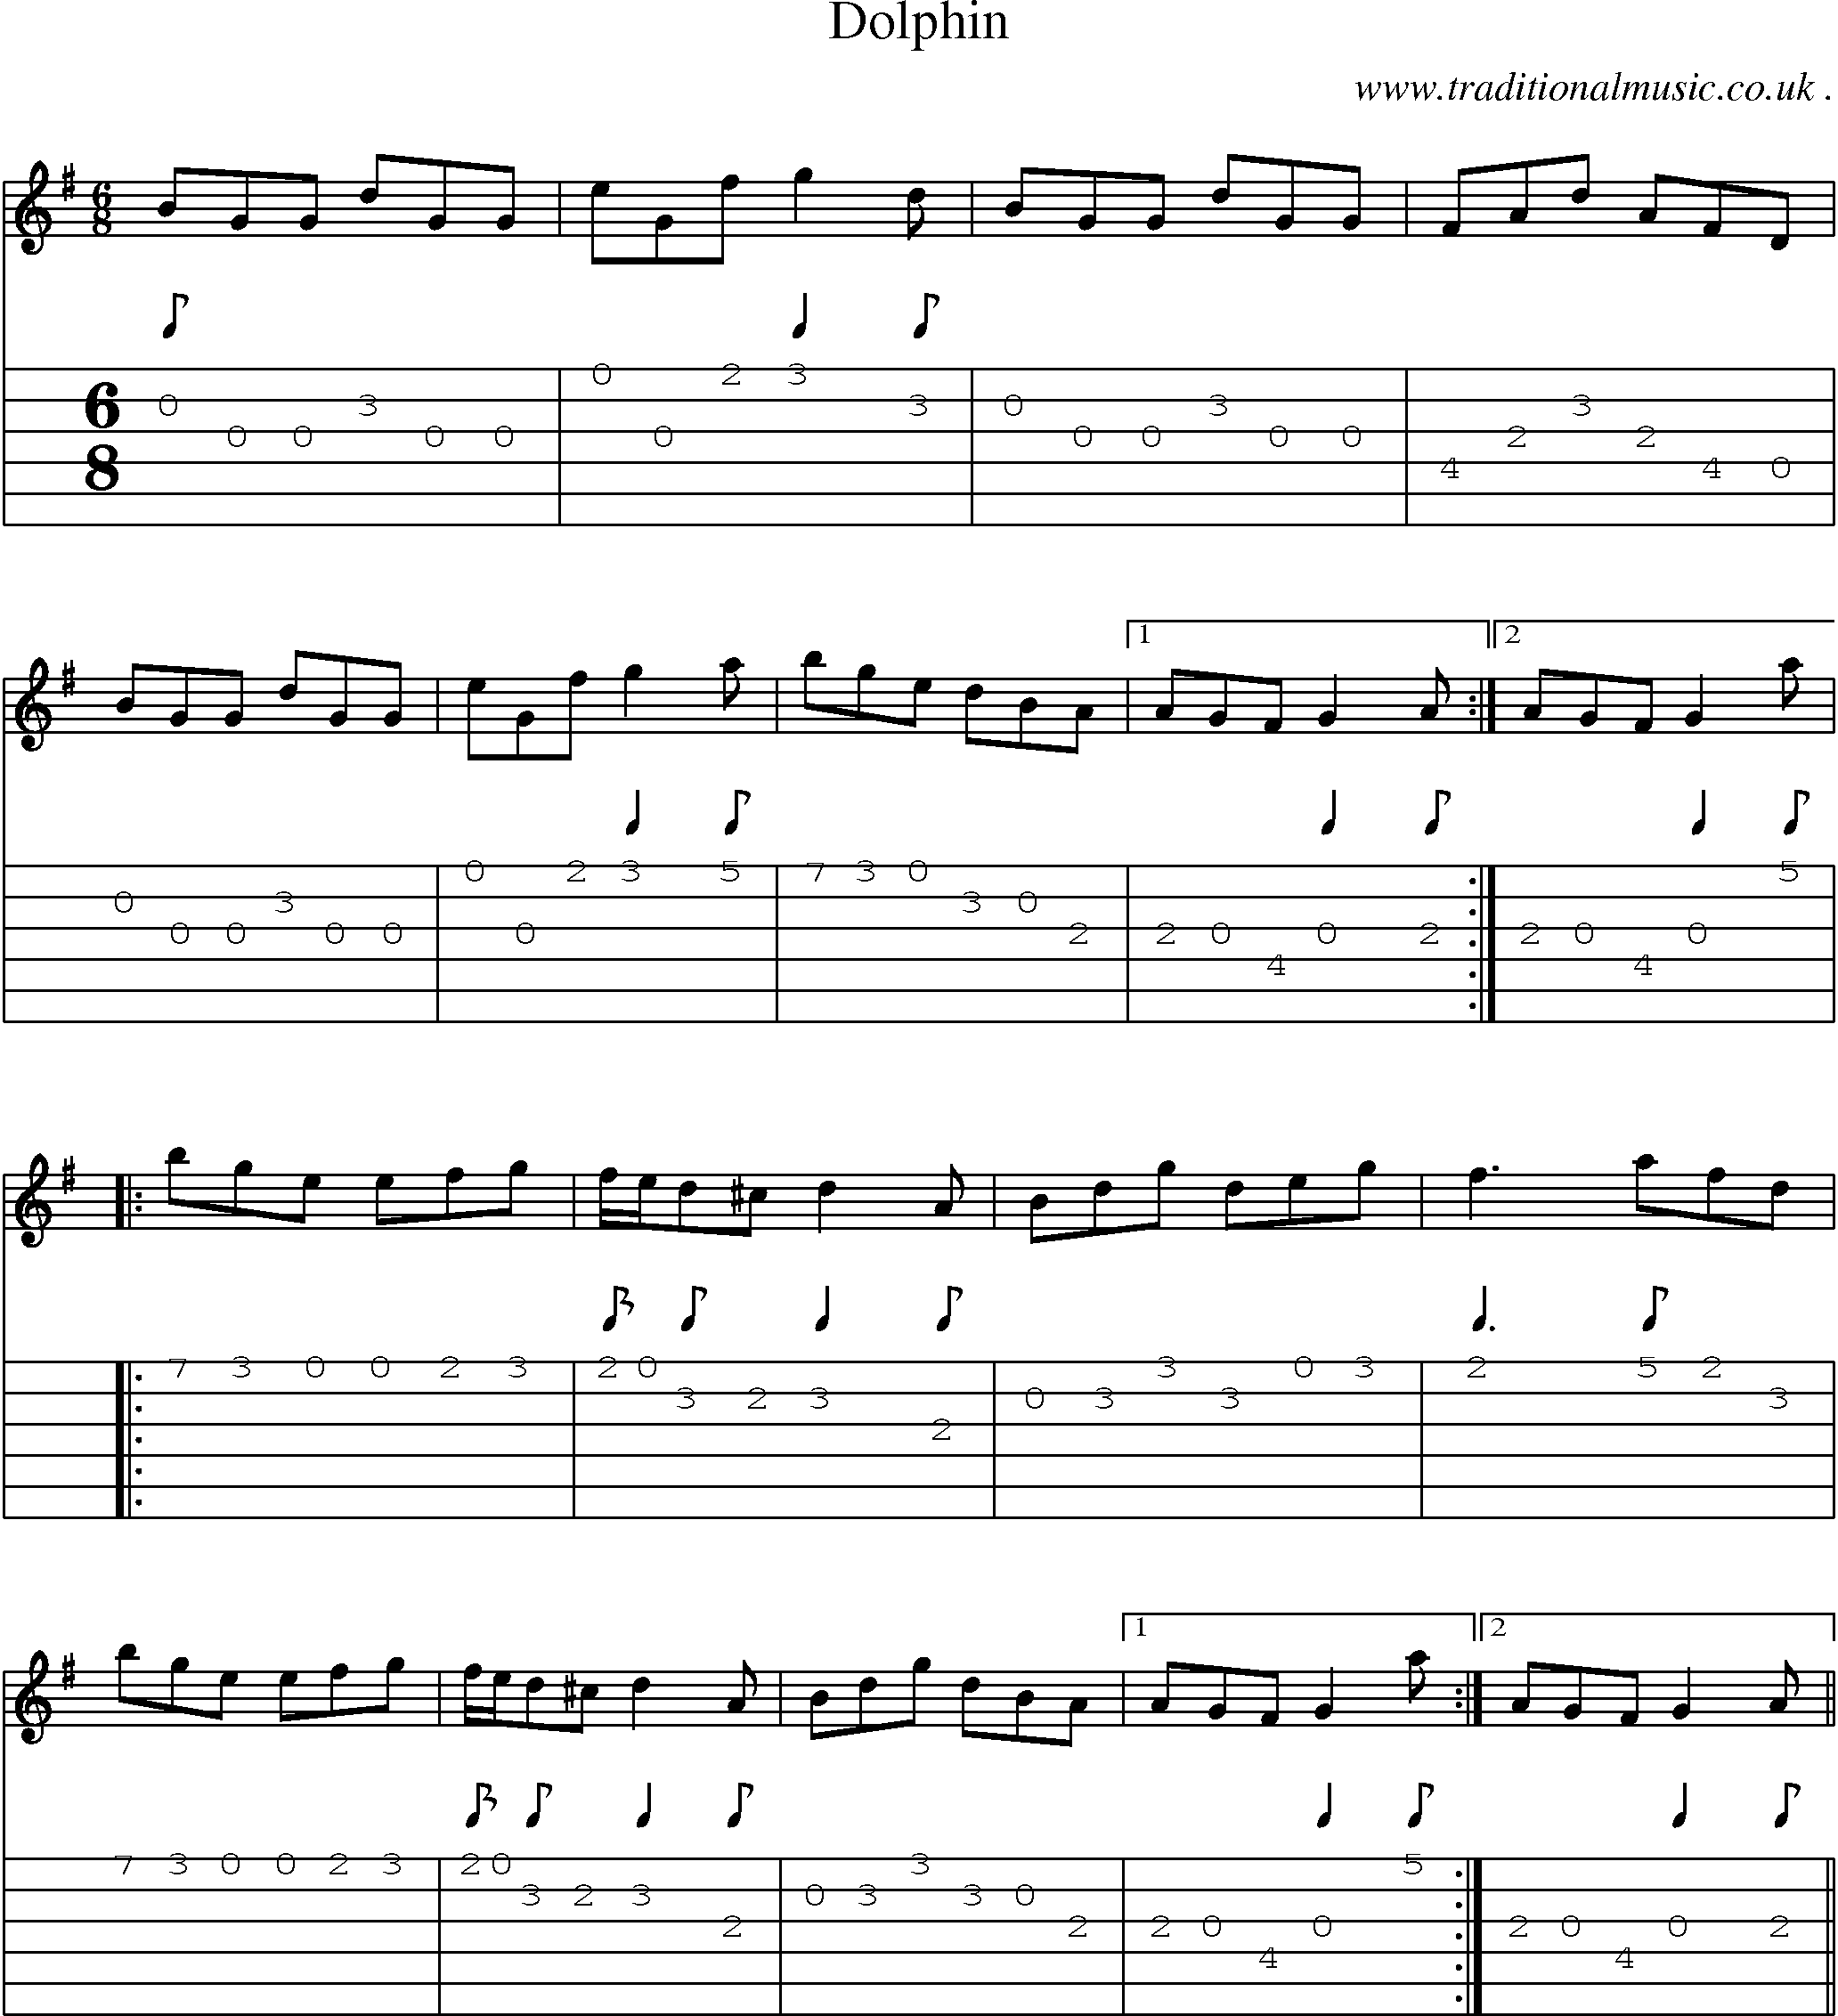 Sheet-Music and Guitar Tabs for Dolphin